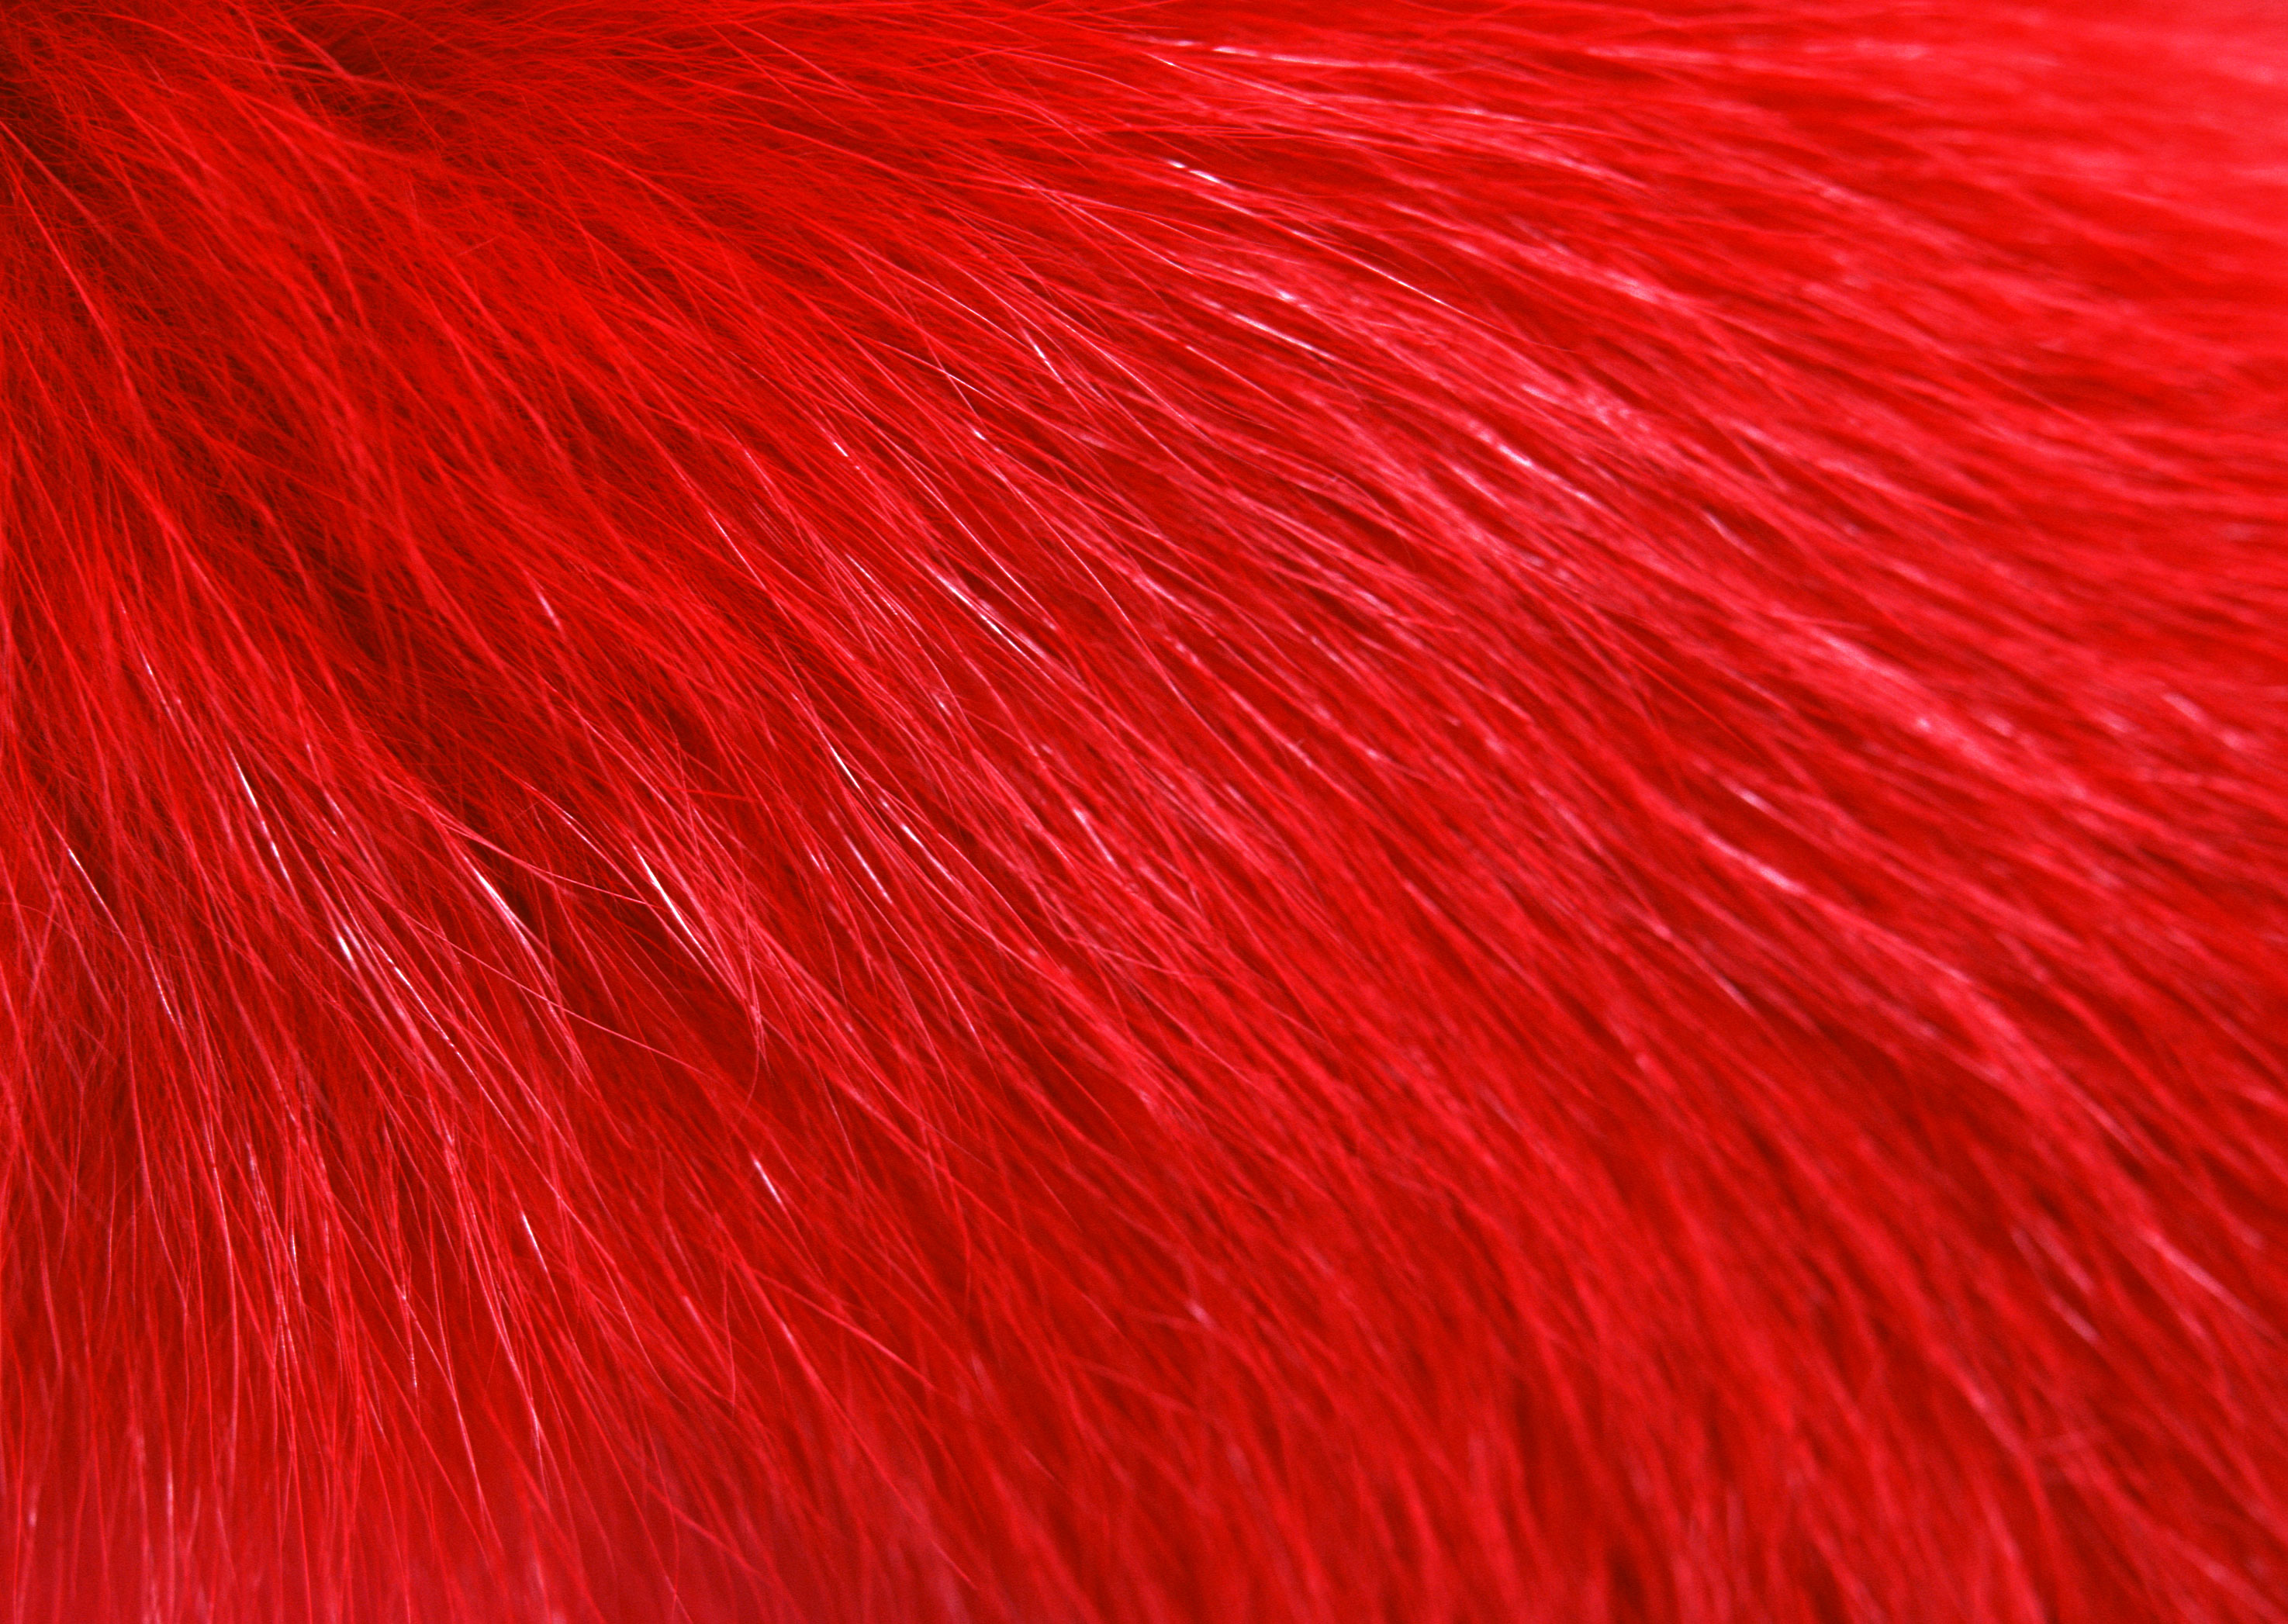 Red fur texture background image